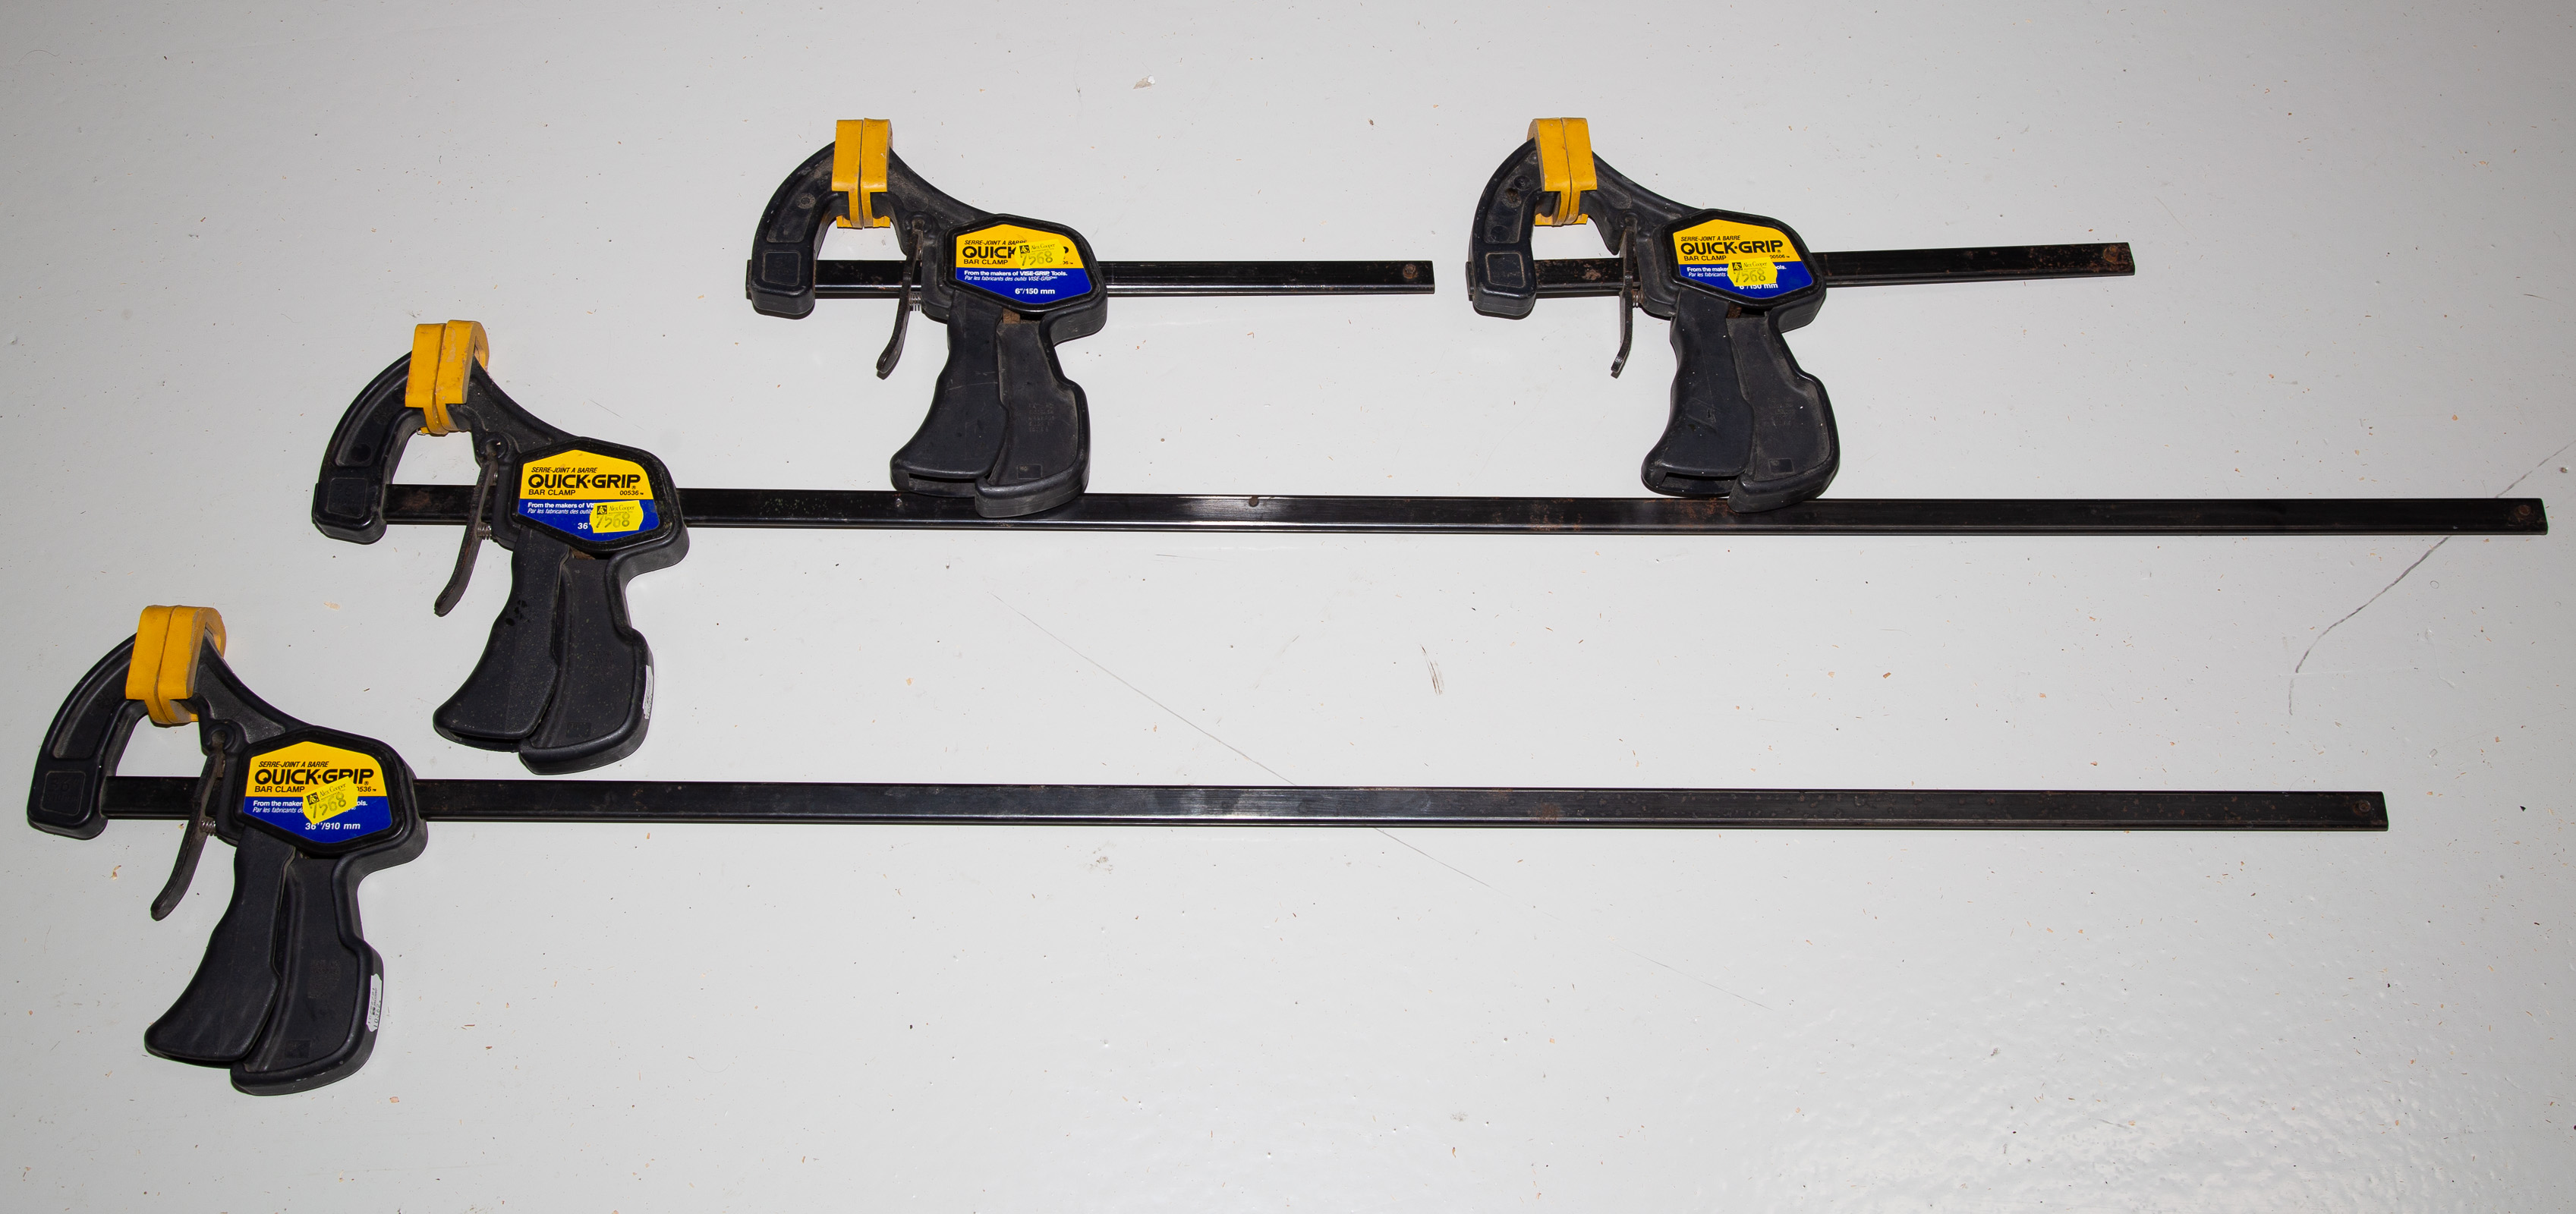 FOUR QUICK GRIP BAR CLAMPS Including 2897c0